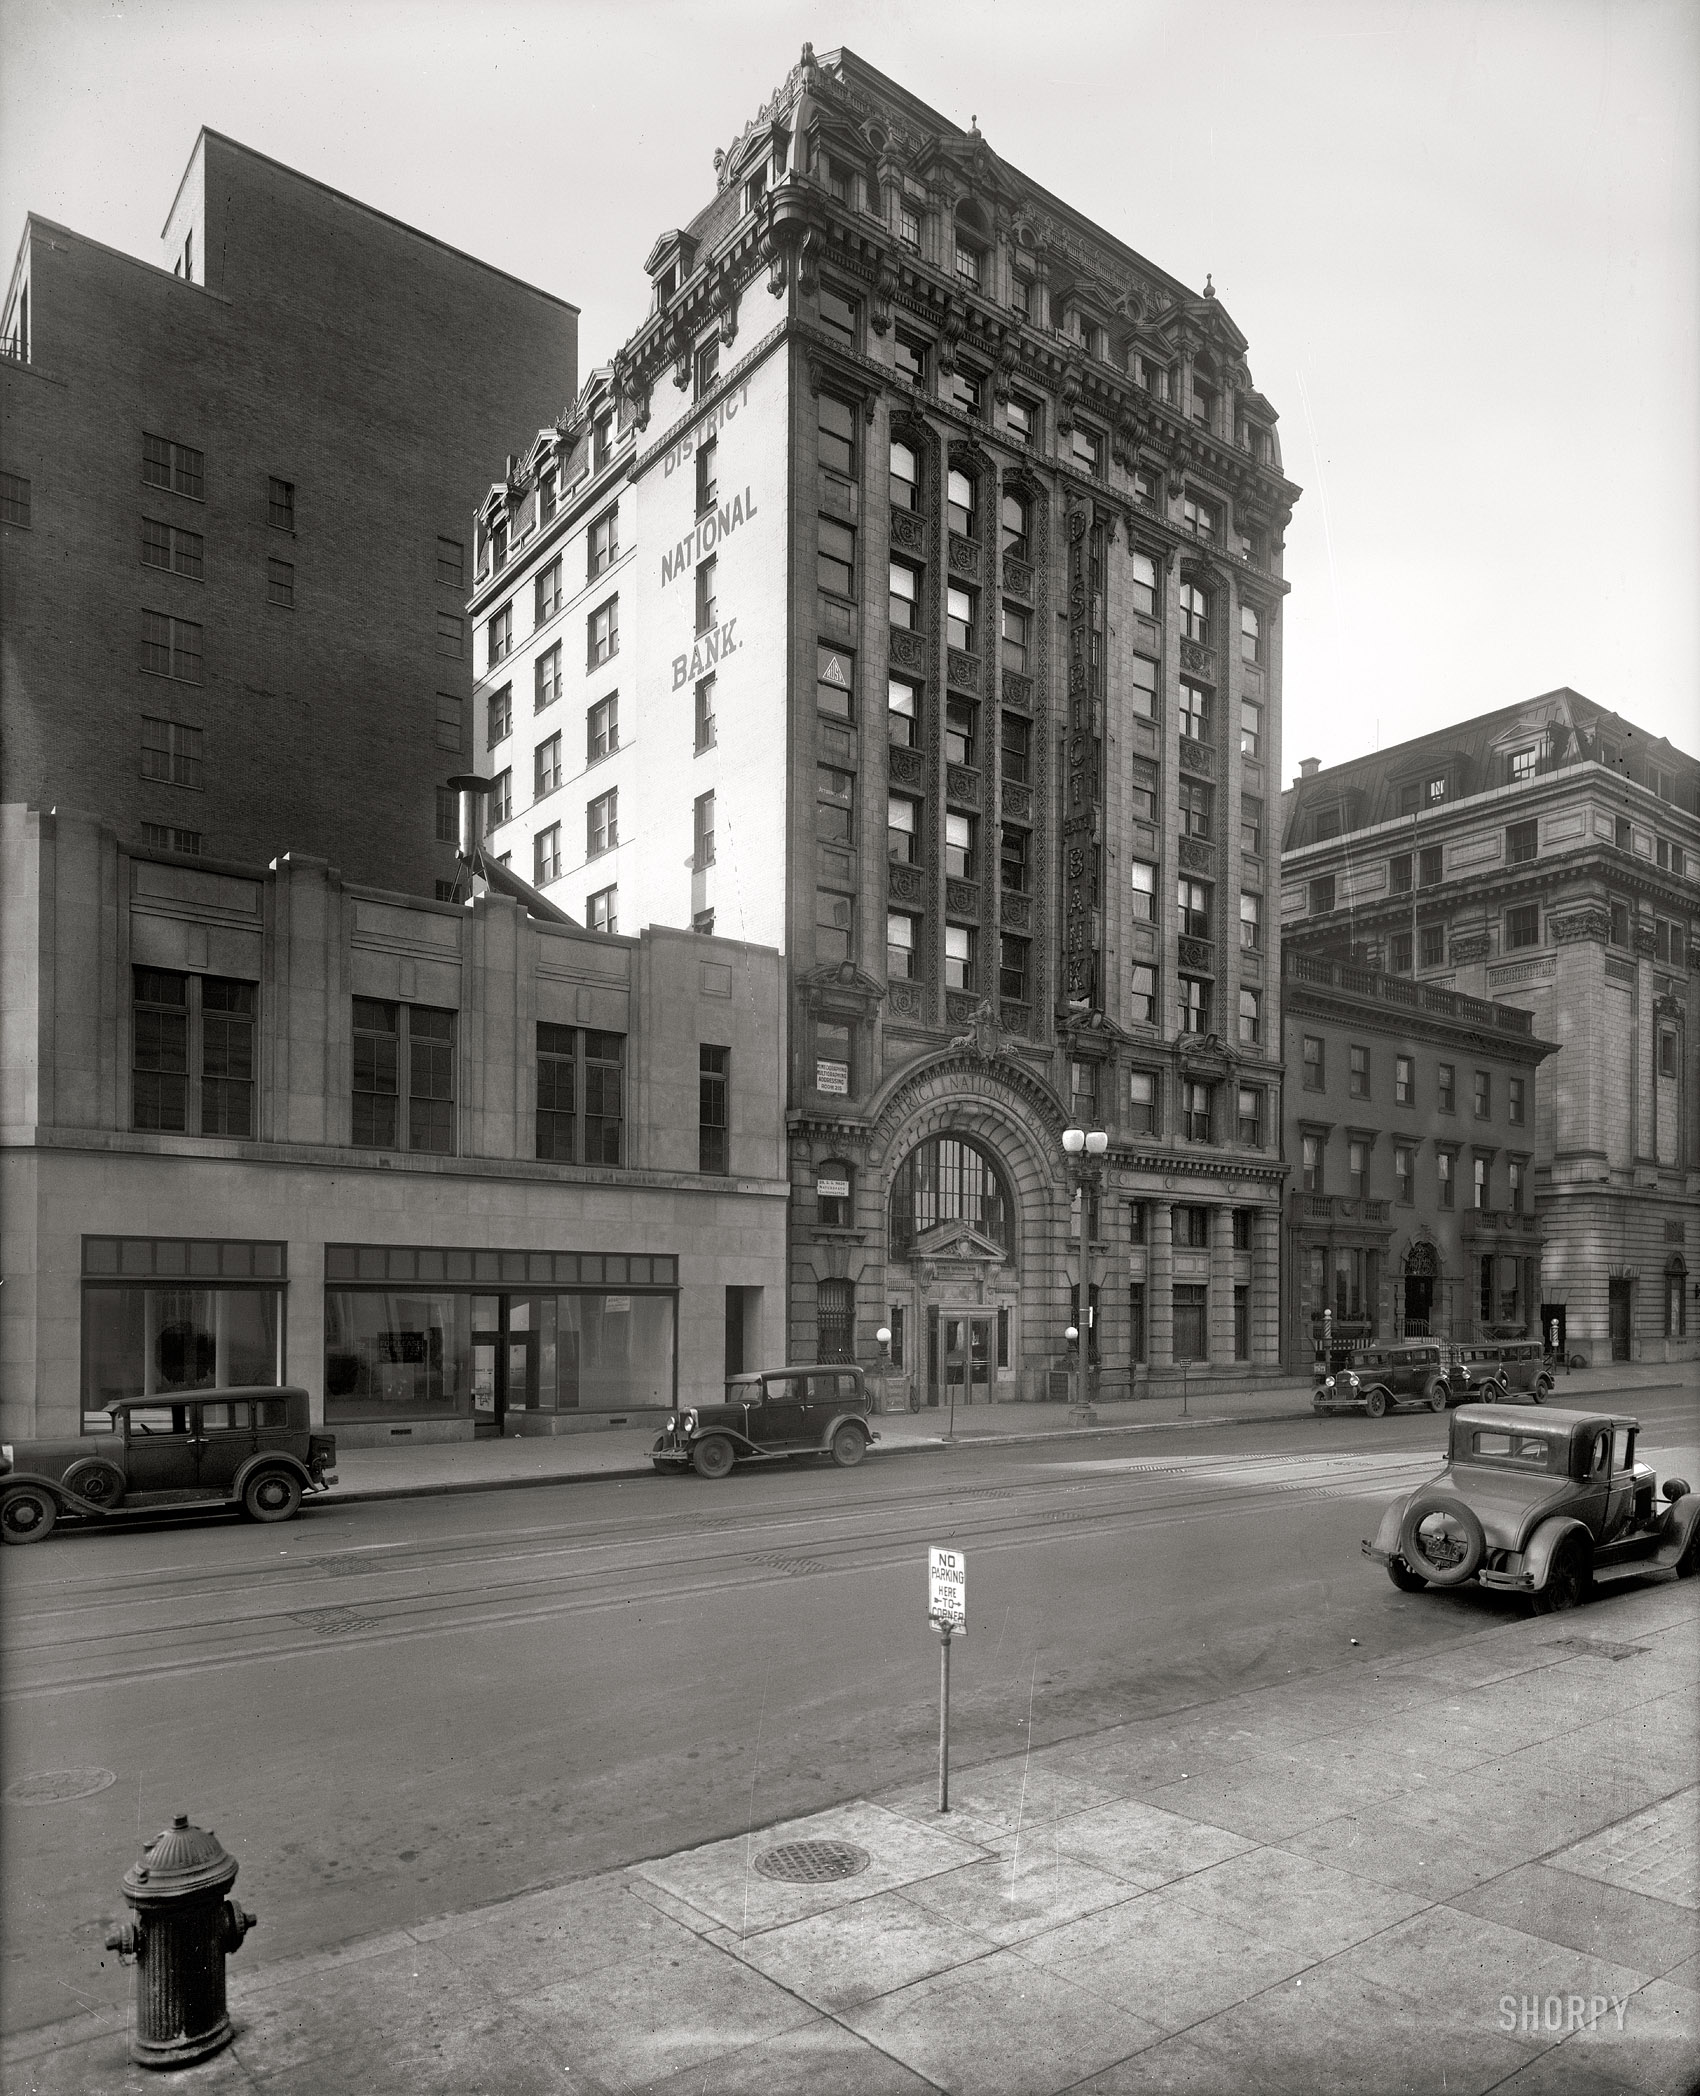 "District National Bank, 1931." This one has a kind of Bonnie and Clyde vibe, don't you think? Harris & Ewing Collection glass negative. View full size.